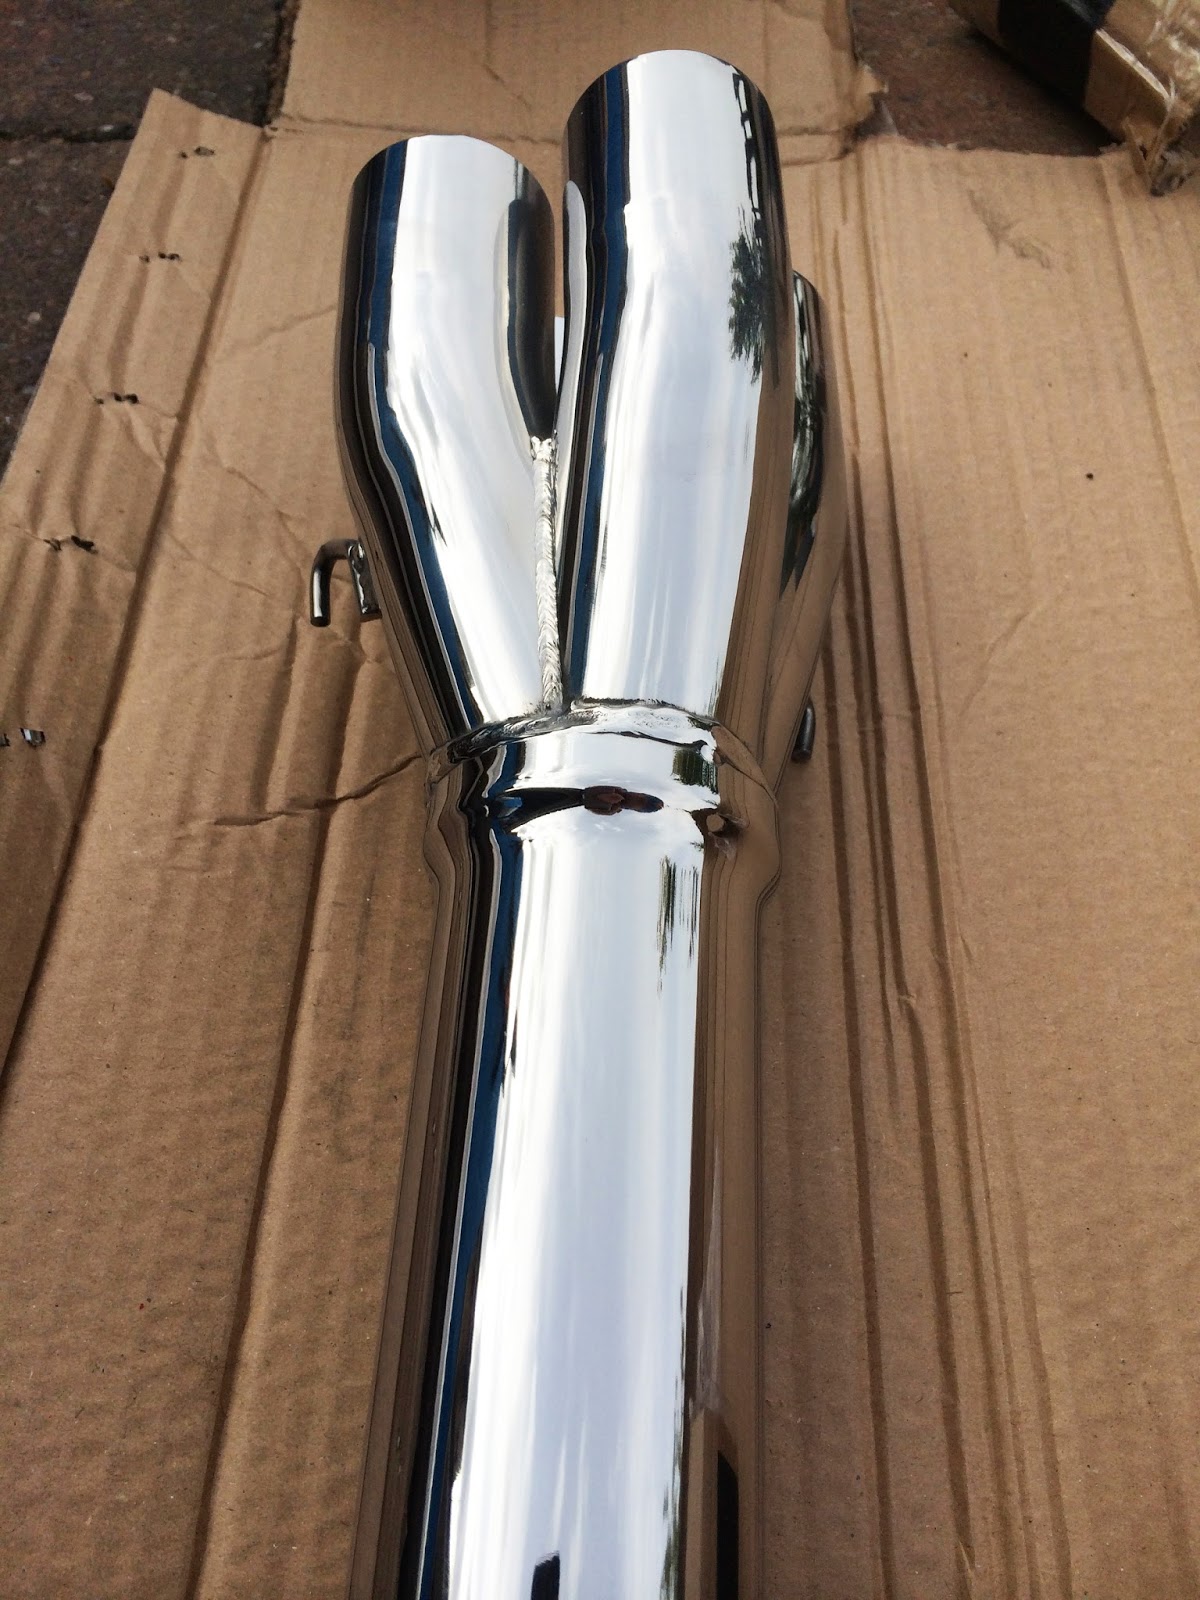 Freshly polished Caterham R500 Duratec Cat Bypass Pipe.